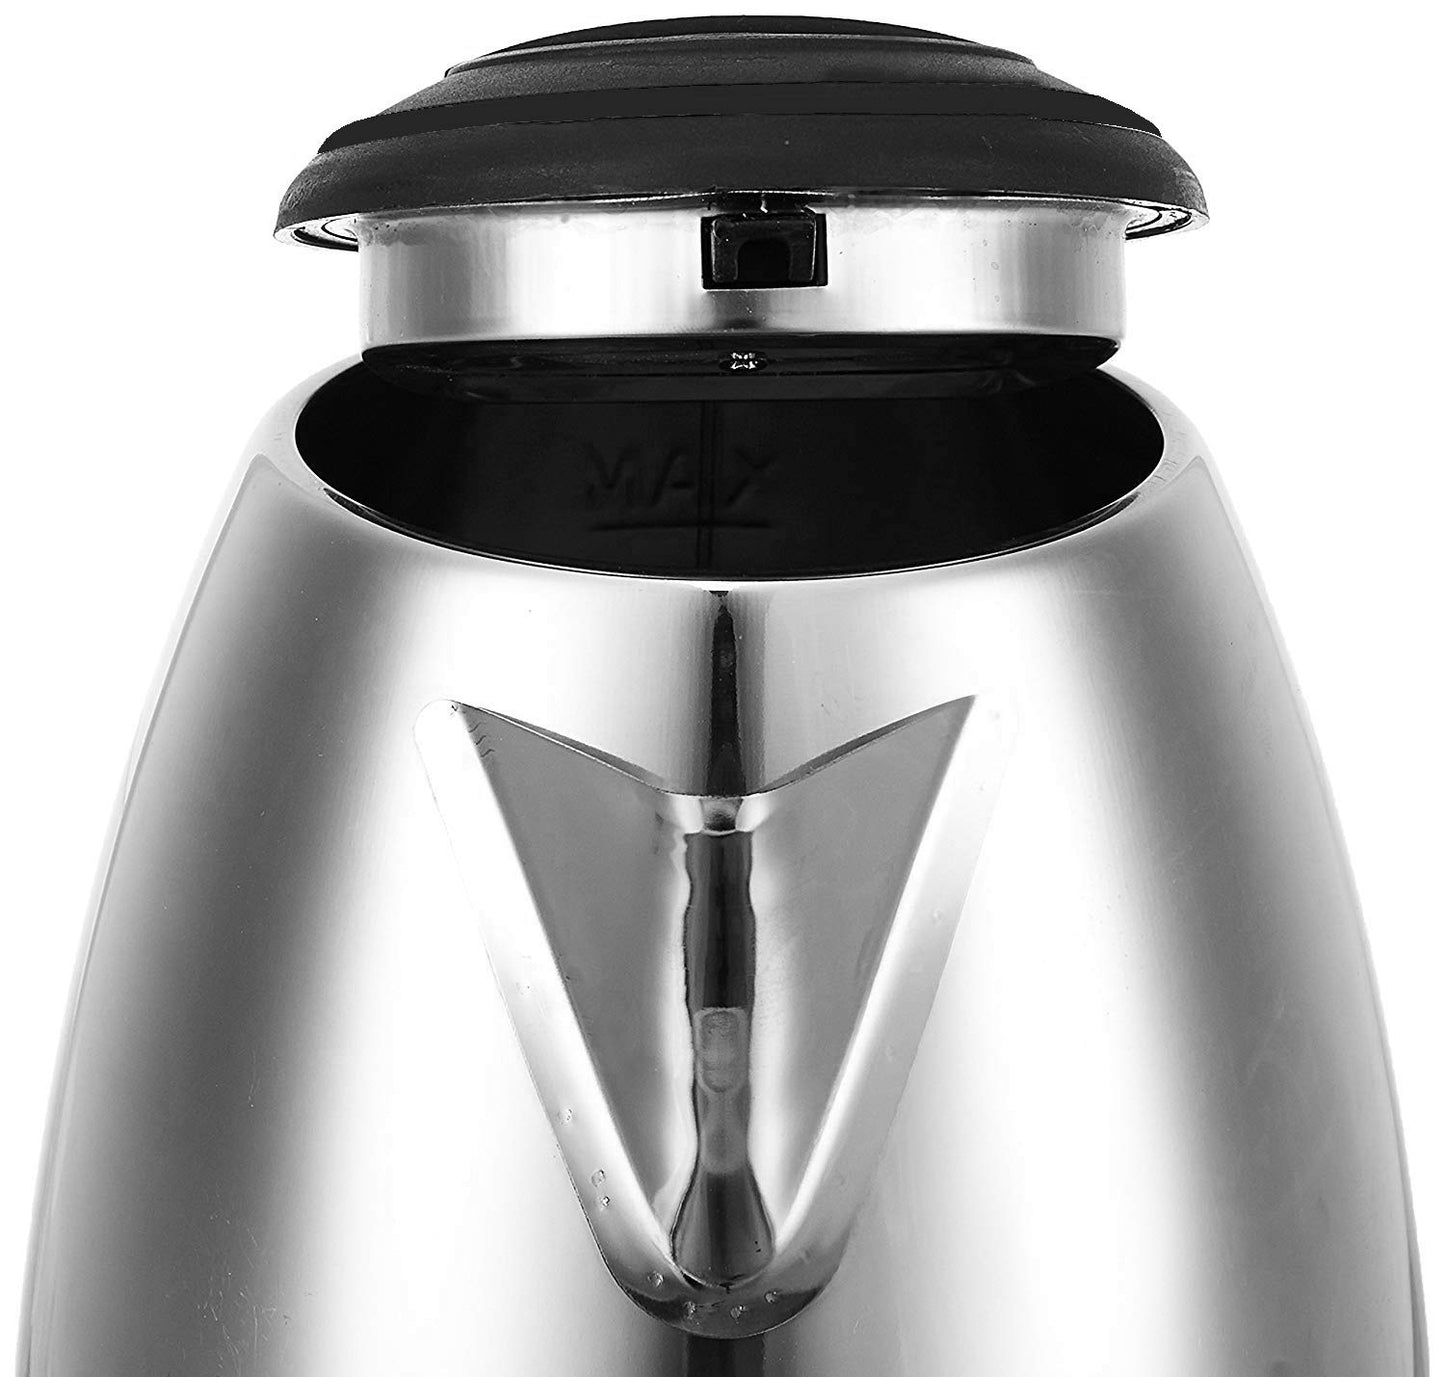 1.2L Stainless Steel Electric Kettle Silver